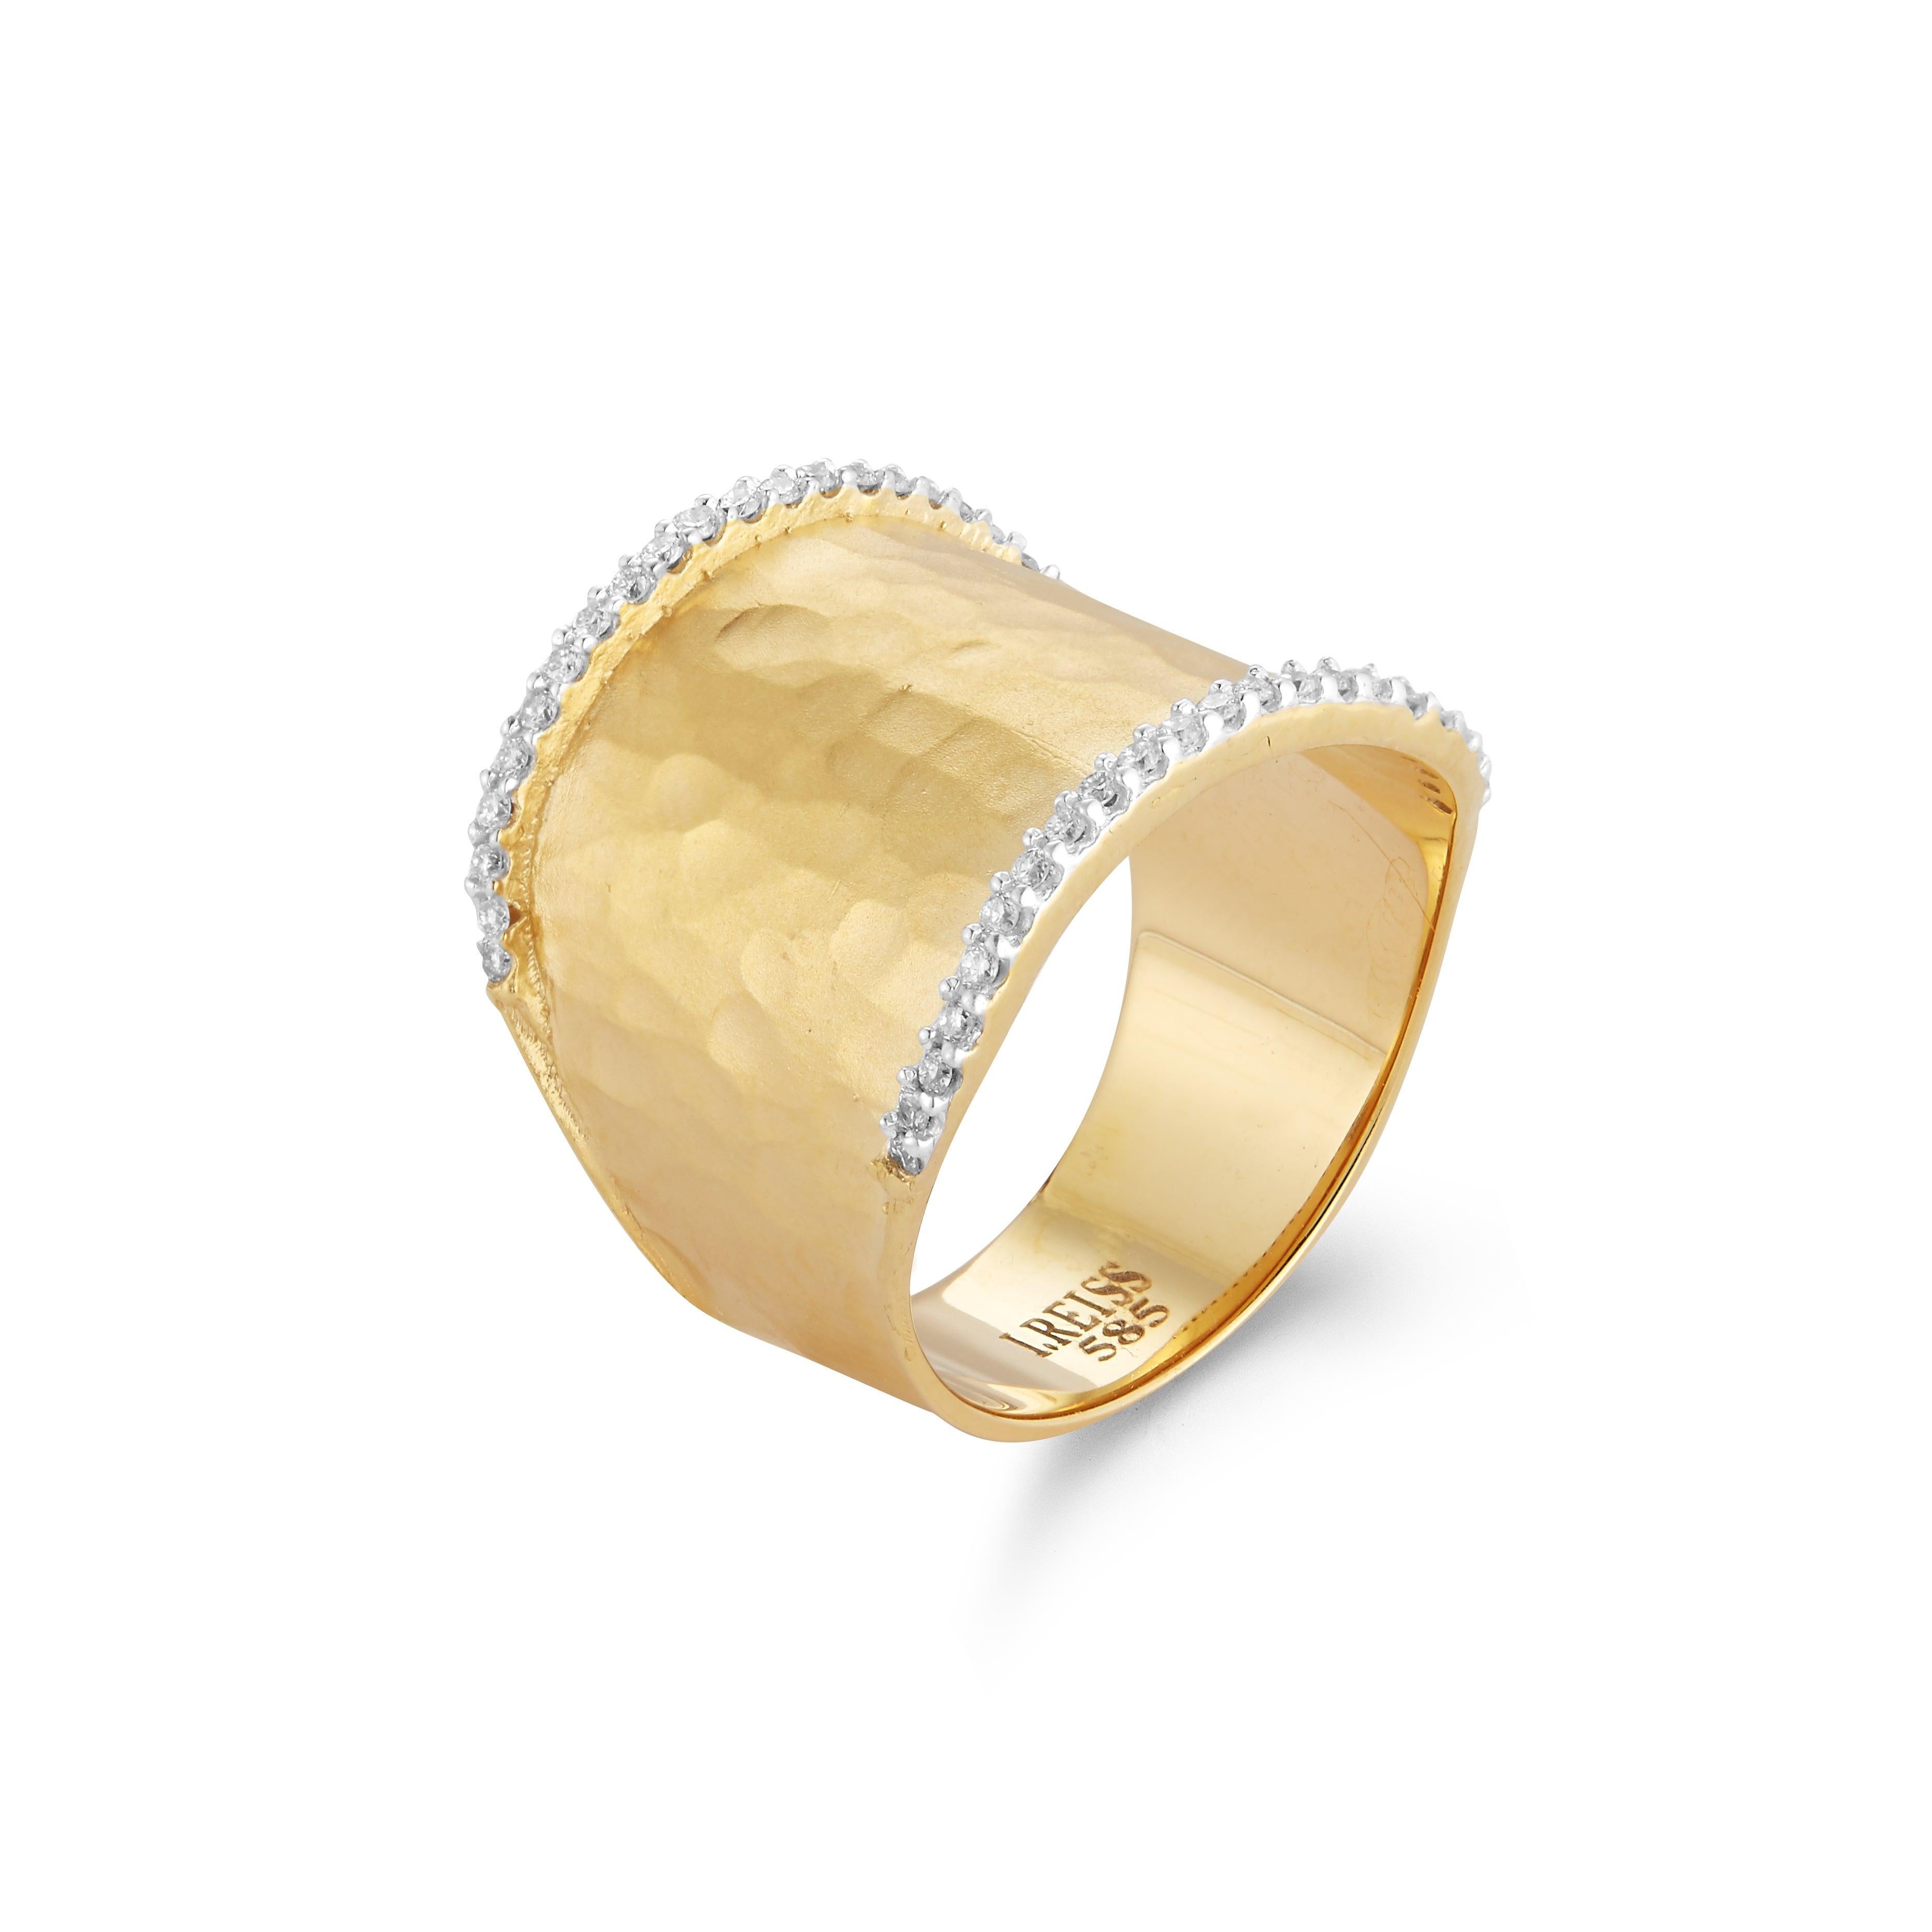 For Sale:  Handcrafted 14 Karat Yellow Gold Cigar Ring 3